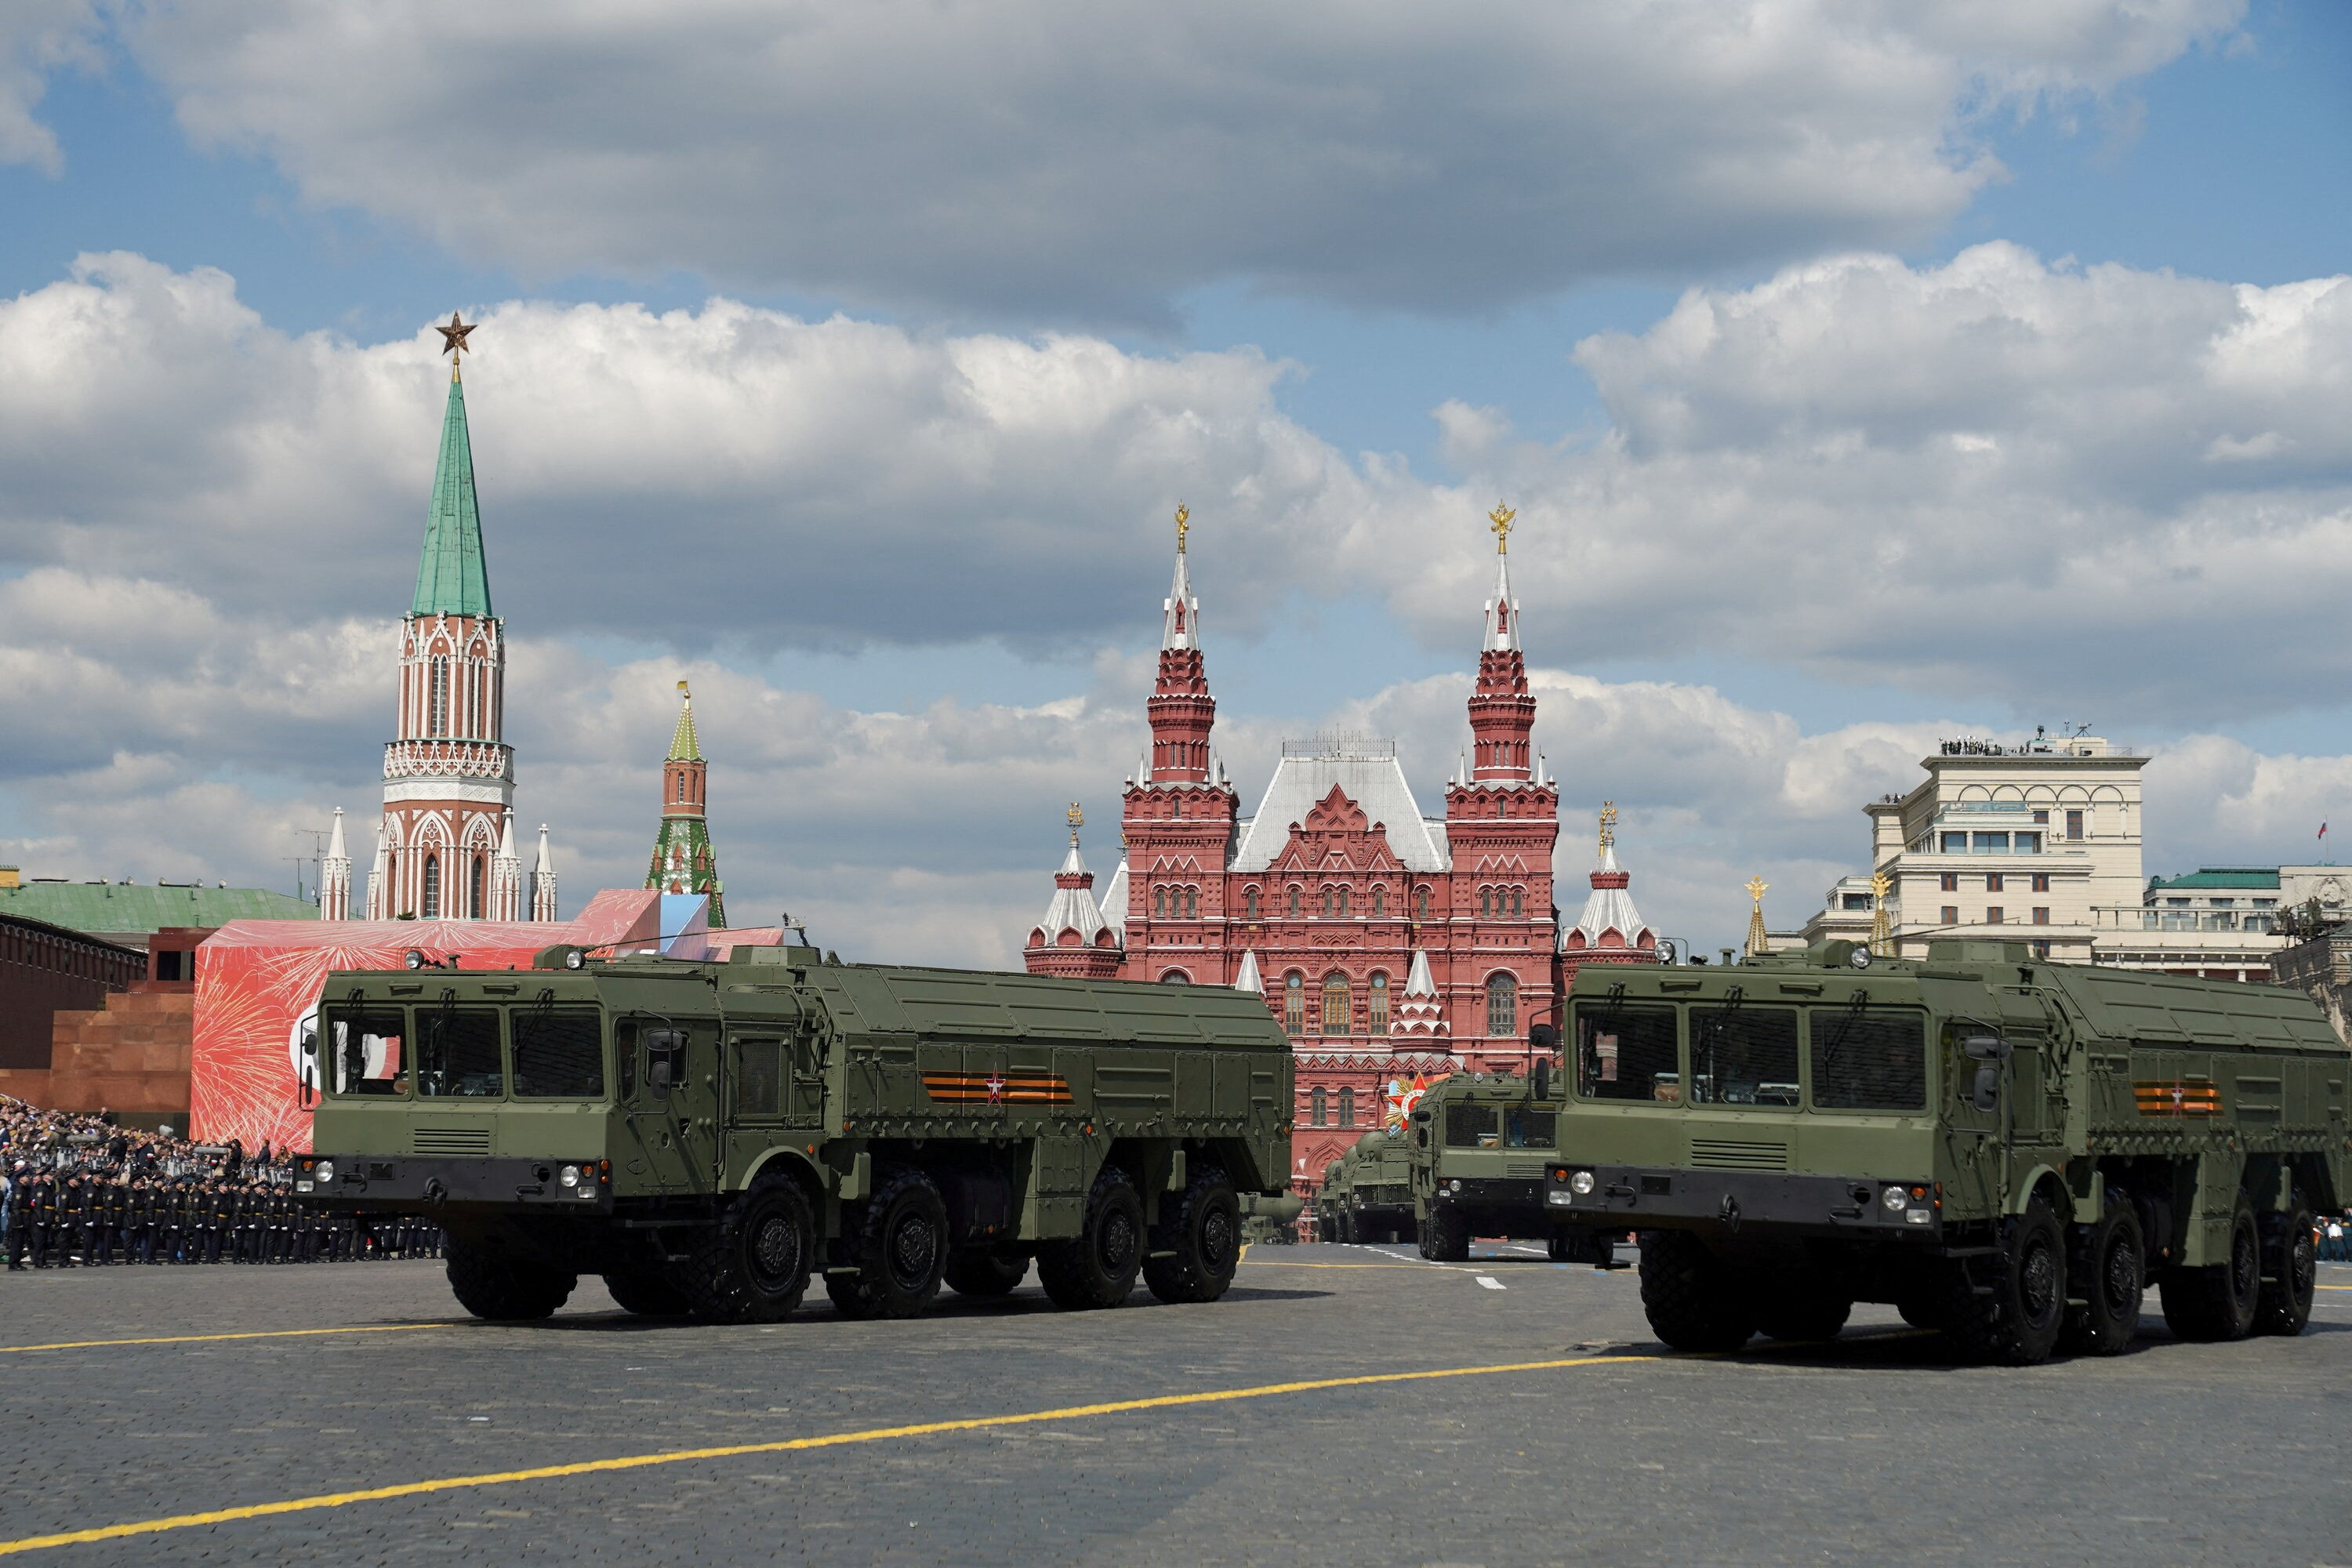 Russian Iskander-M missile launchers take part in the Victory Day military parade in Moscow’s Red Square on May 9. Photo: Moscow News Agency via Reuters